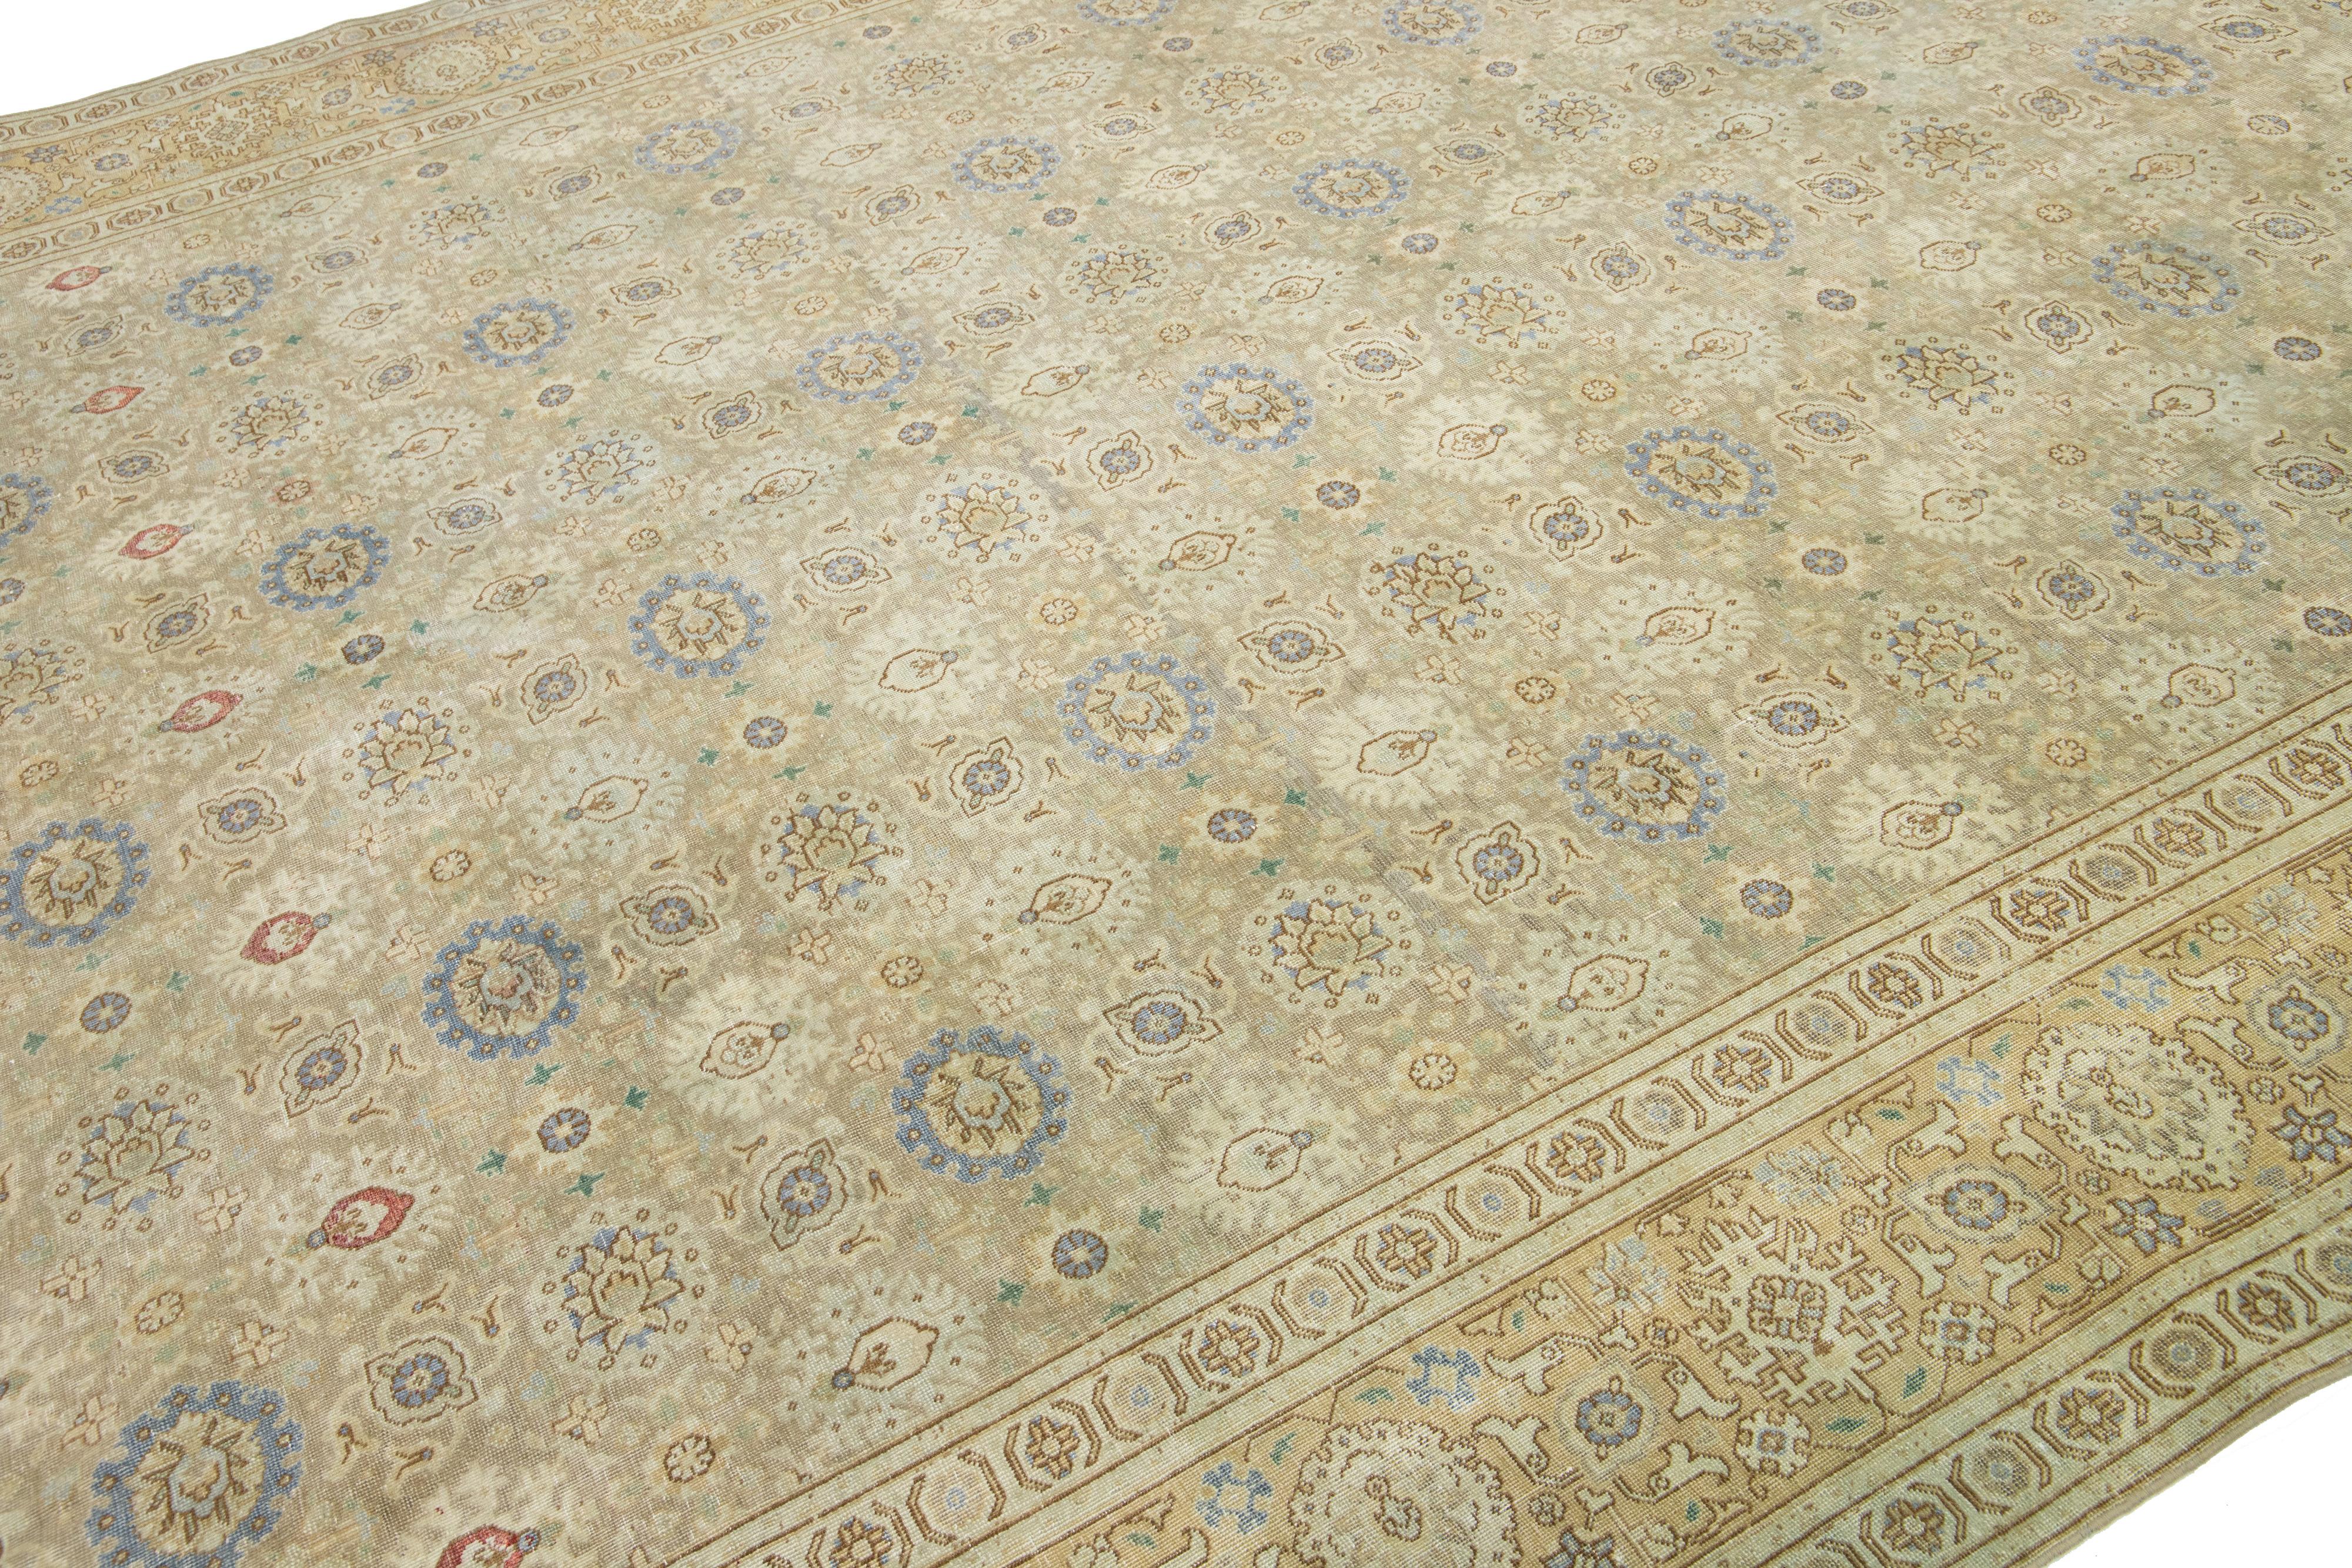 Hand-Knotted Antique 1920s Persian Tabriz Wool Rug With Floral Pattern In Beige  For Sale